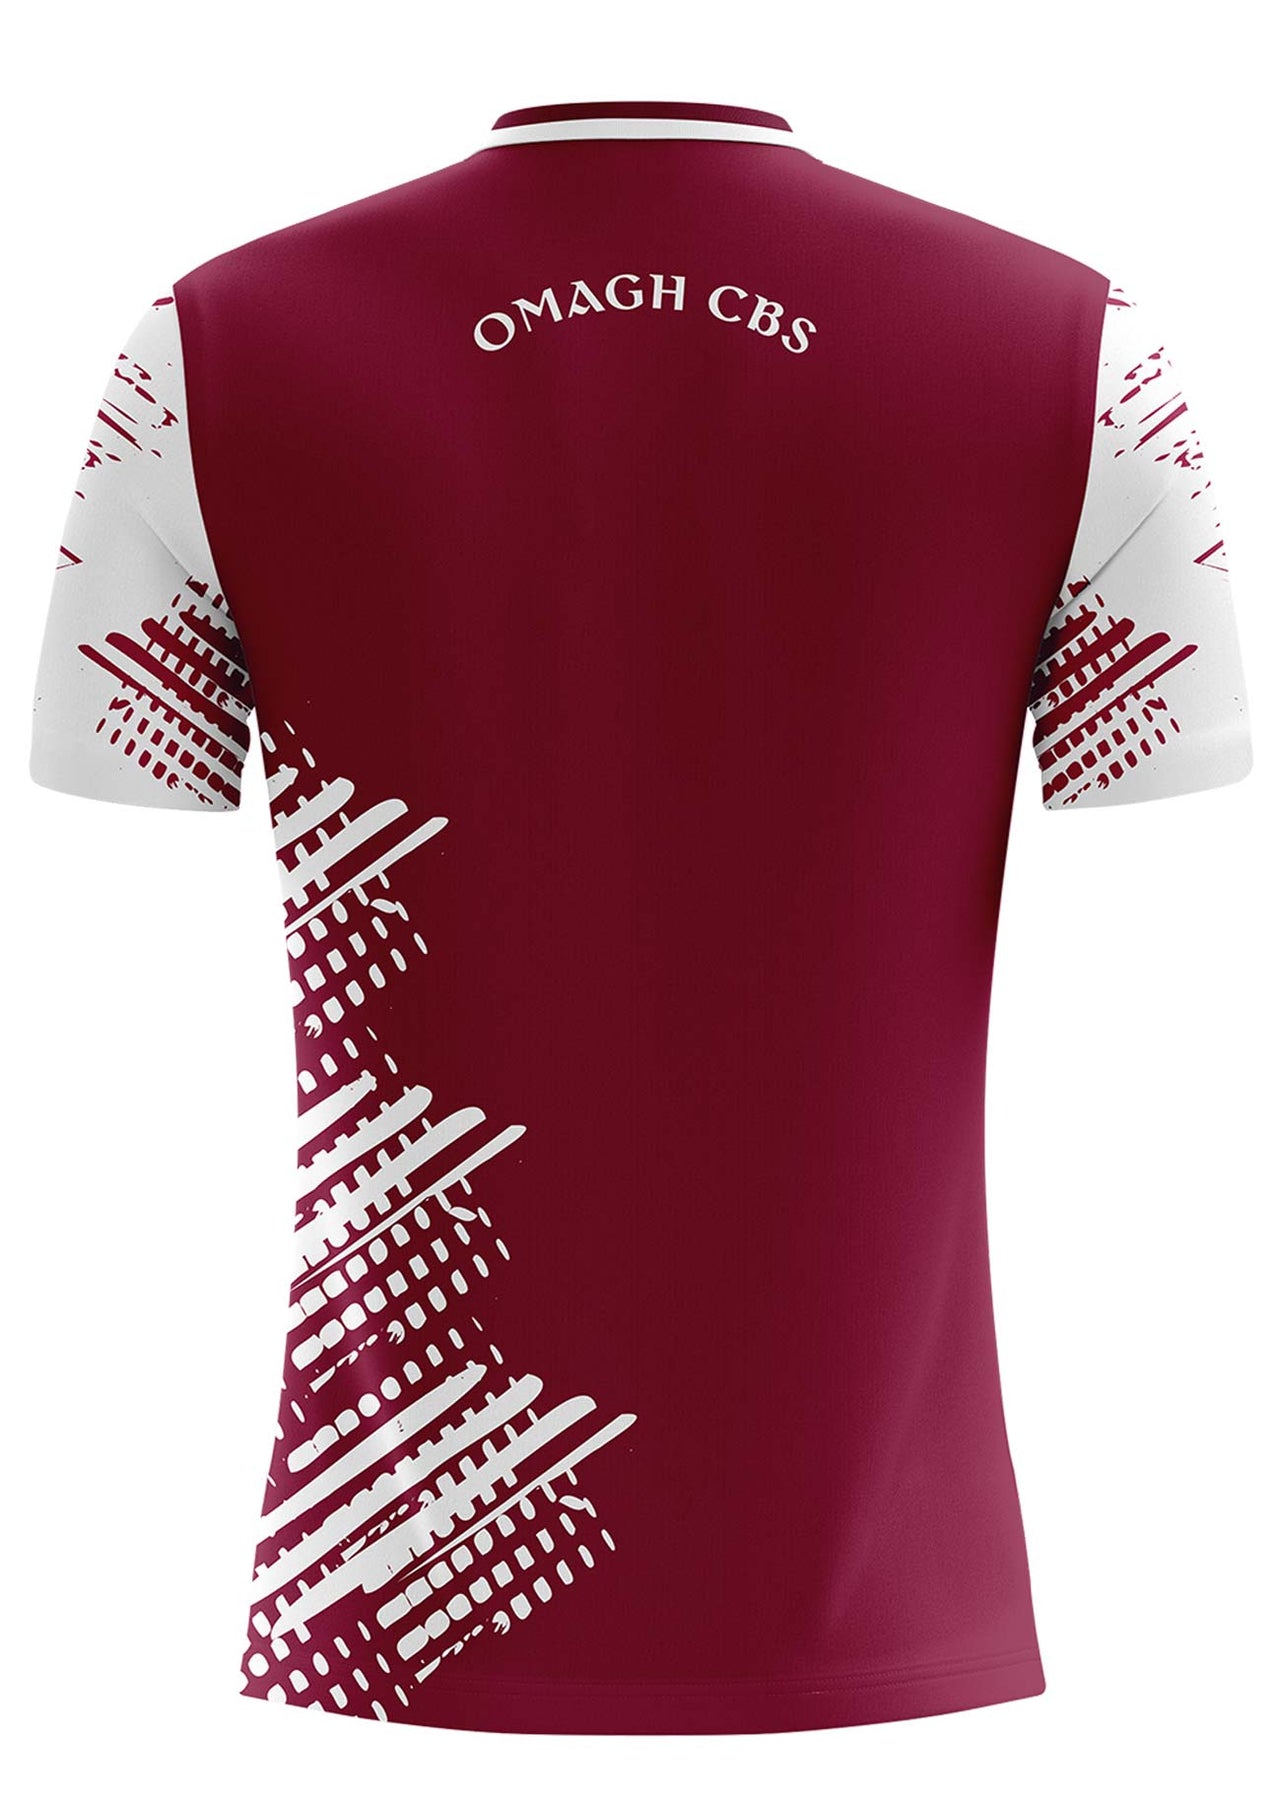 Omagh CBS Home Jersey Regular Fit Adult